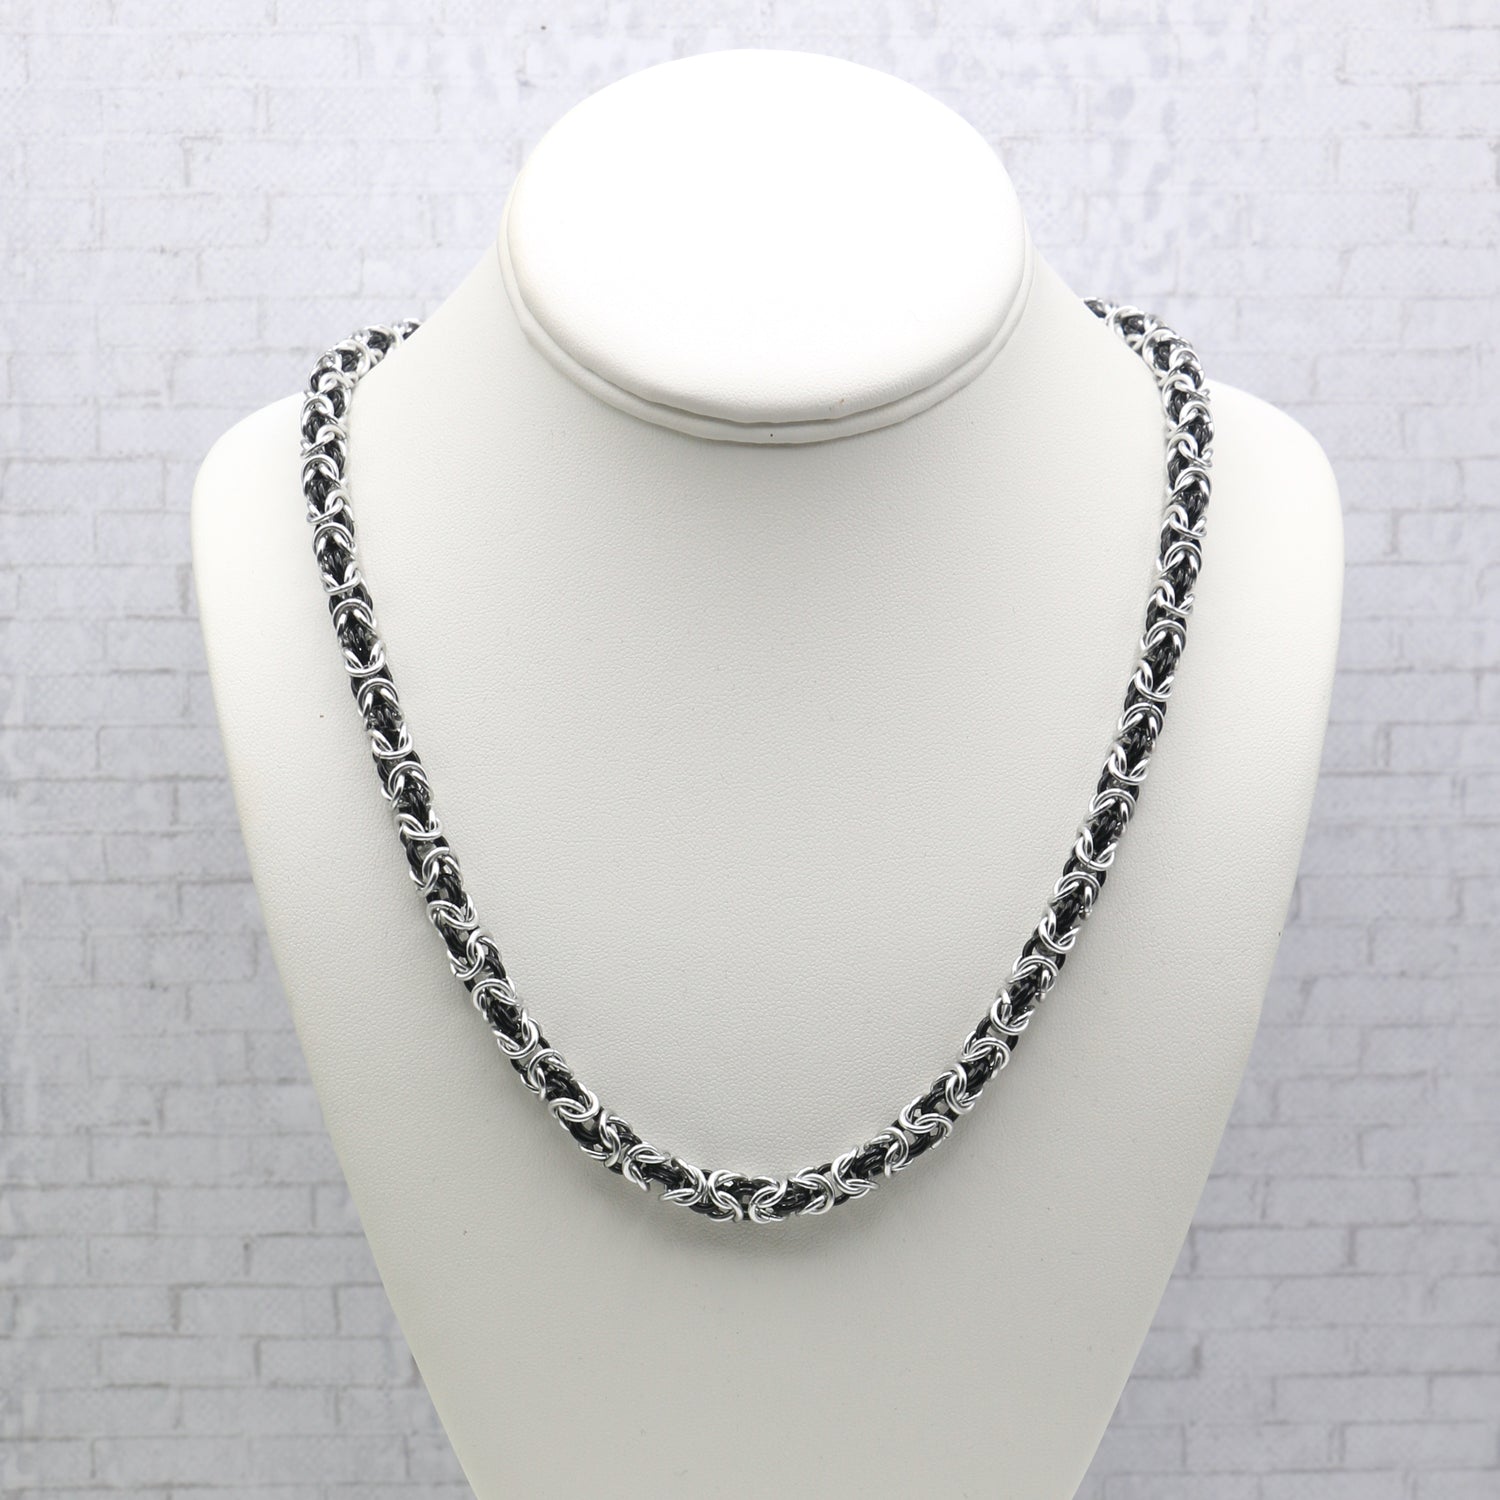 Necklaces - Chainmail